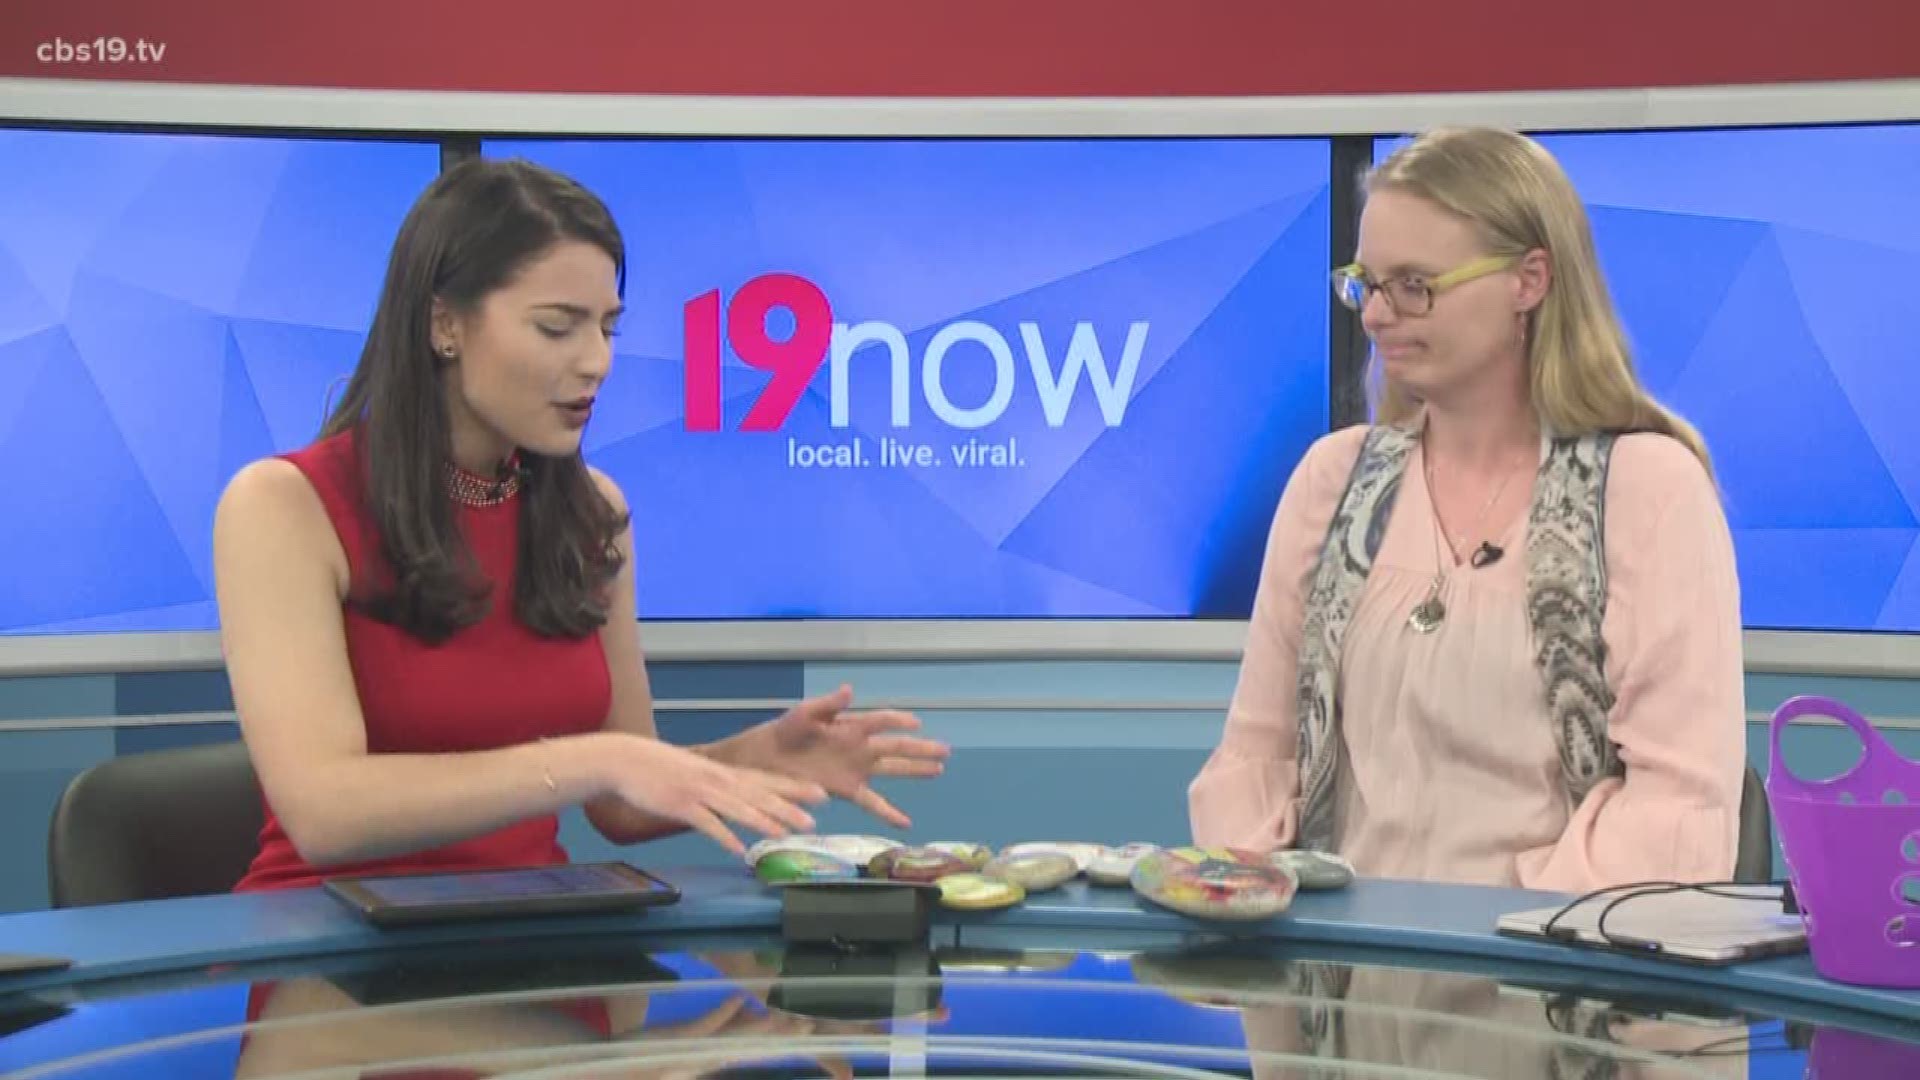 East Texas mom, Kattie Struhall visits the 19now studio to talk about why she paints children's book characters on rocks